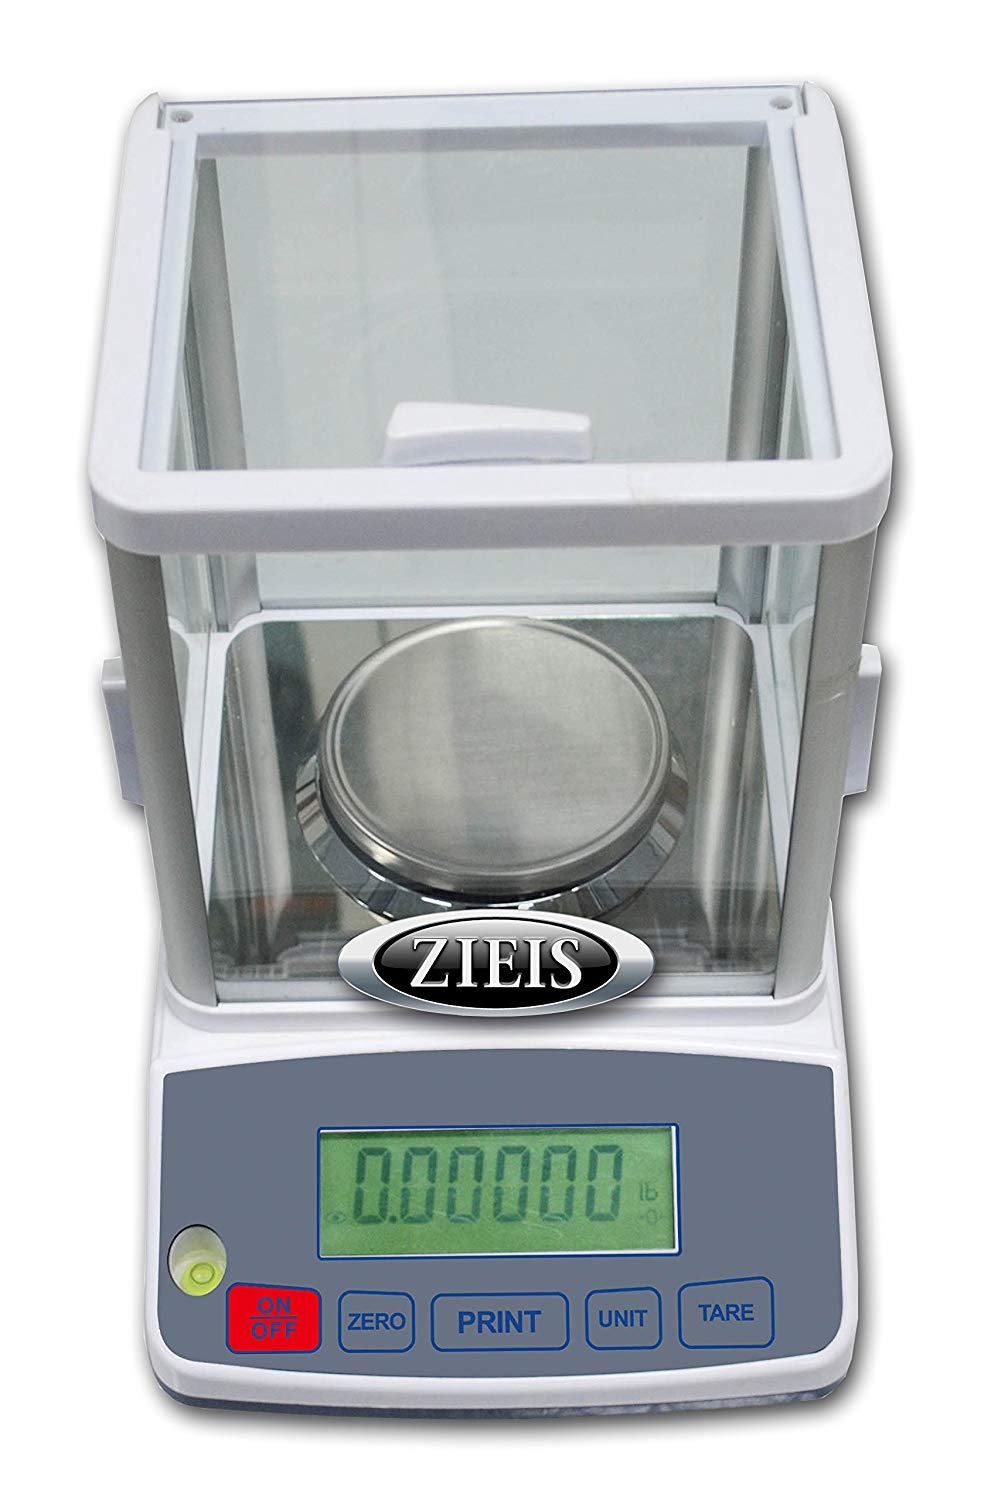 Touchscreen precision balance / up to 300 g